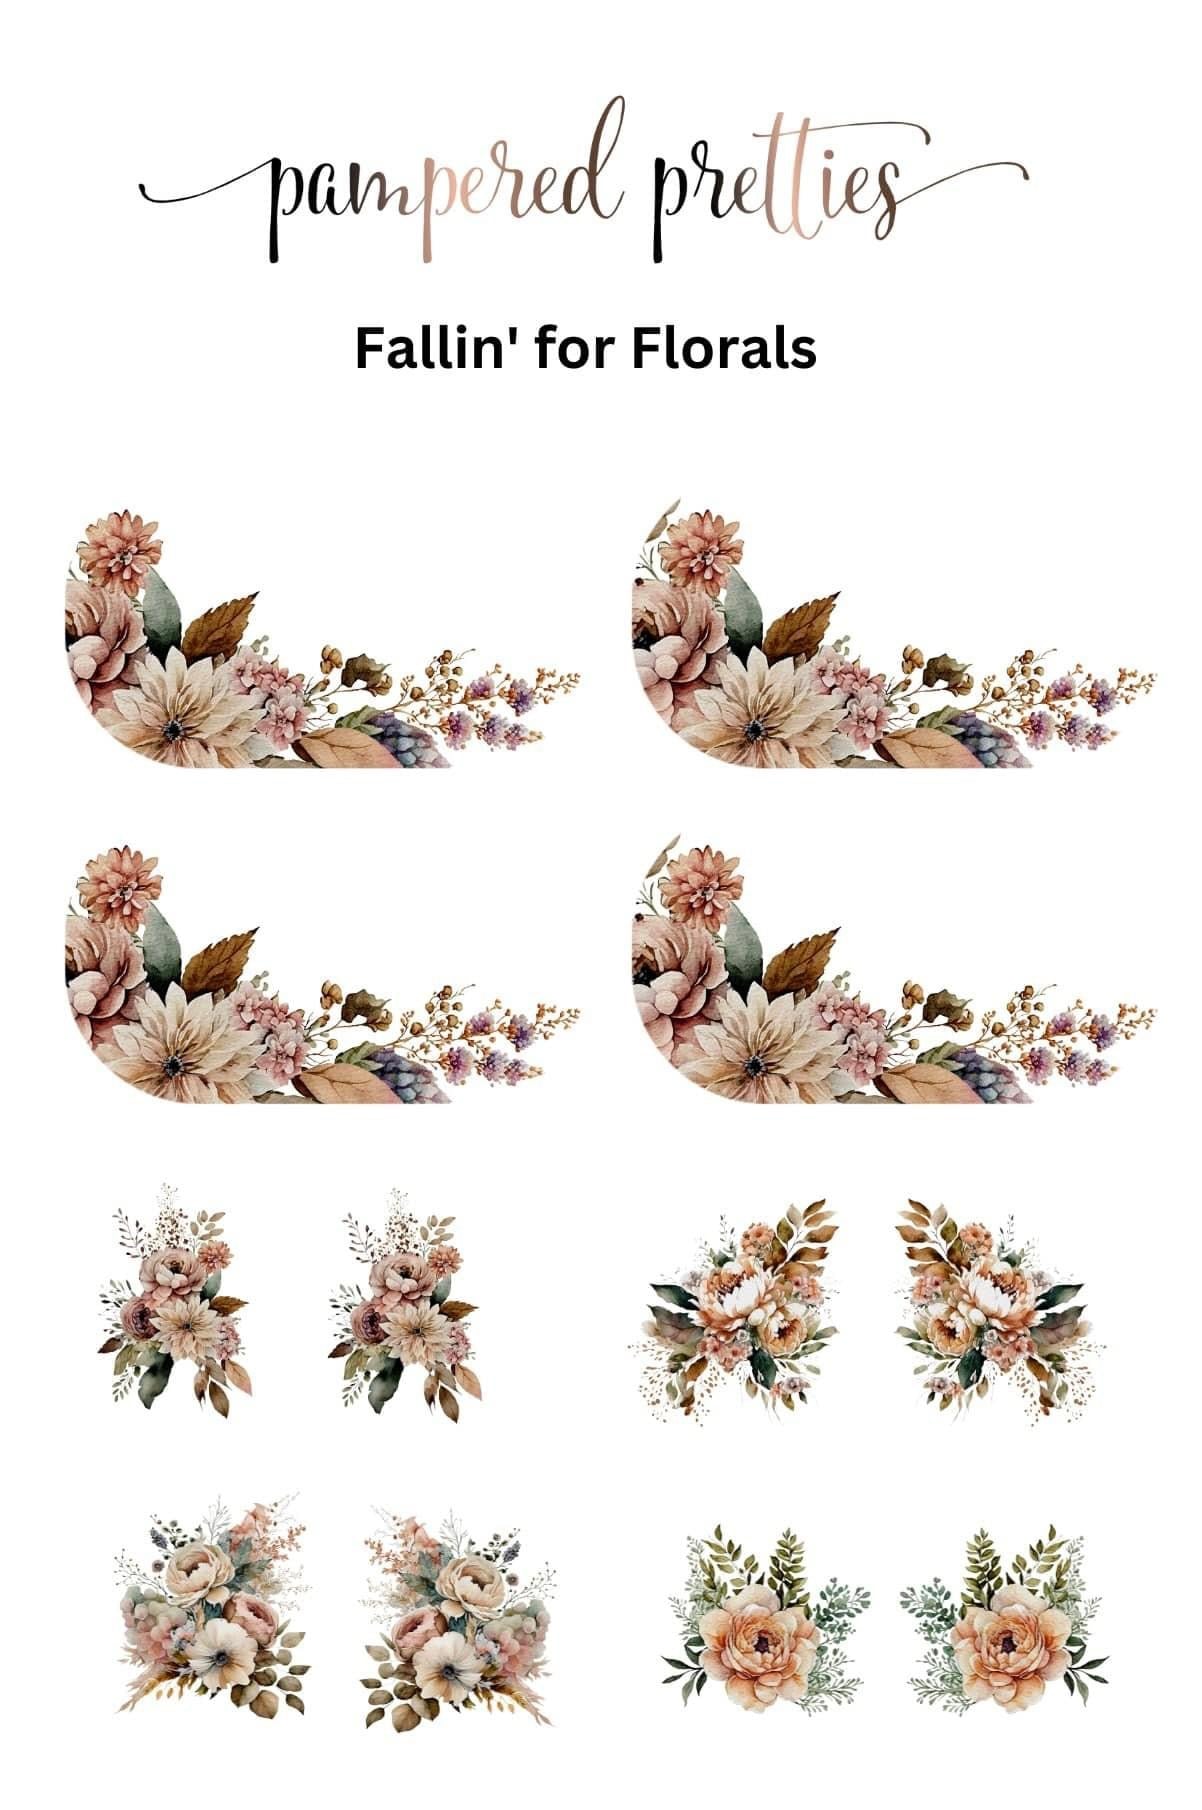 Fall & Spring Floral Stems PenDezign Packet